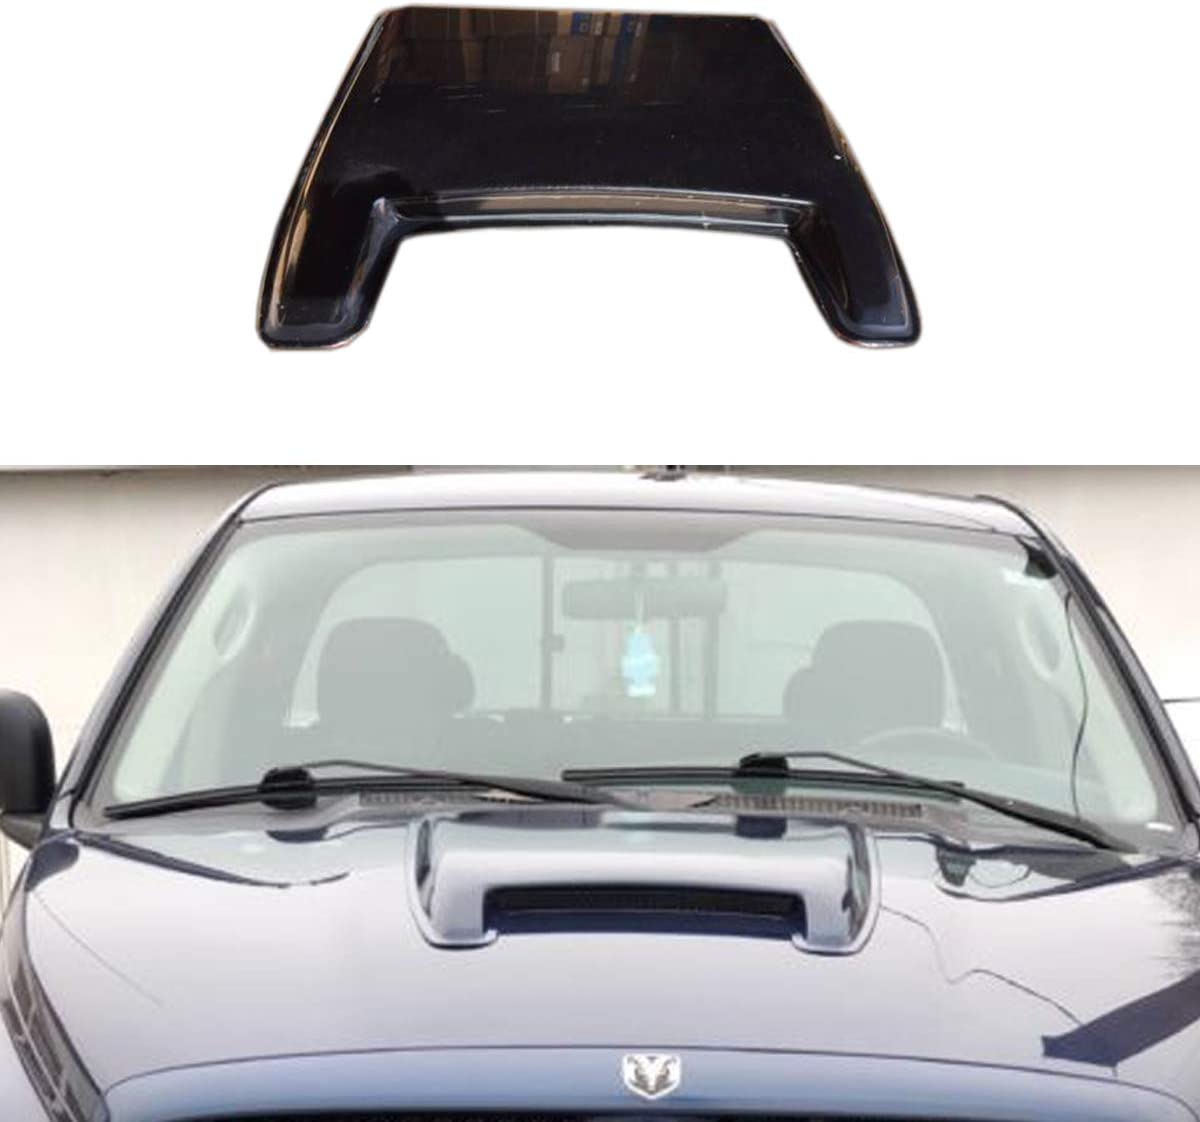 Riseking 1pcs Universal Ram Style Black ABS Paintable Hood Scoop with 3M Foam Tape Compatible with Pickup SUV RK-HS-01